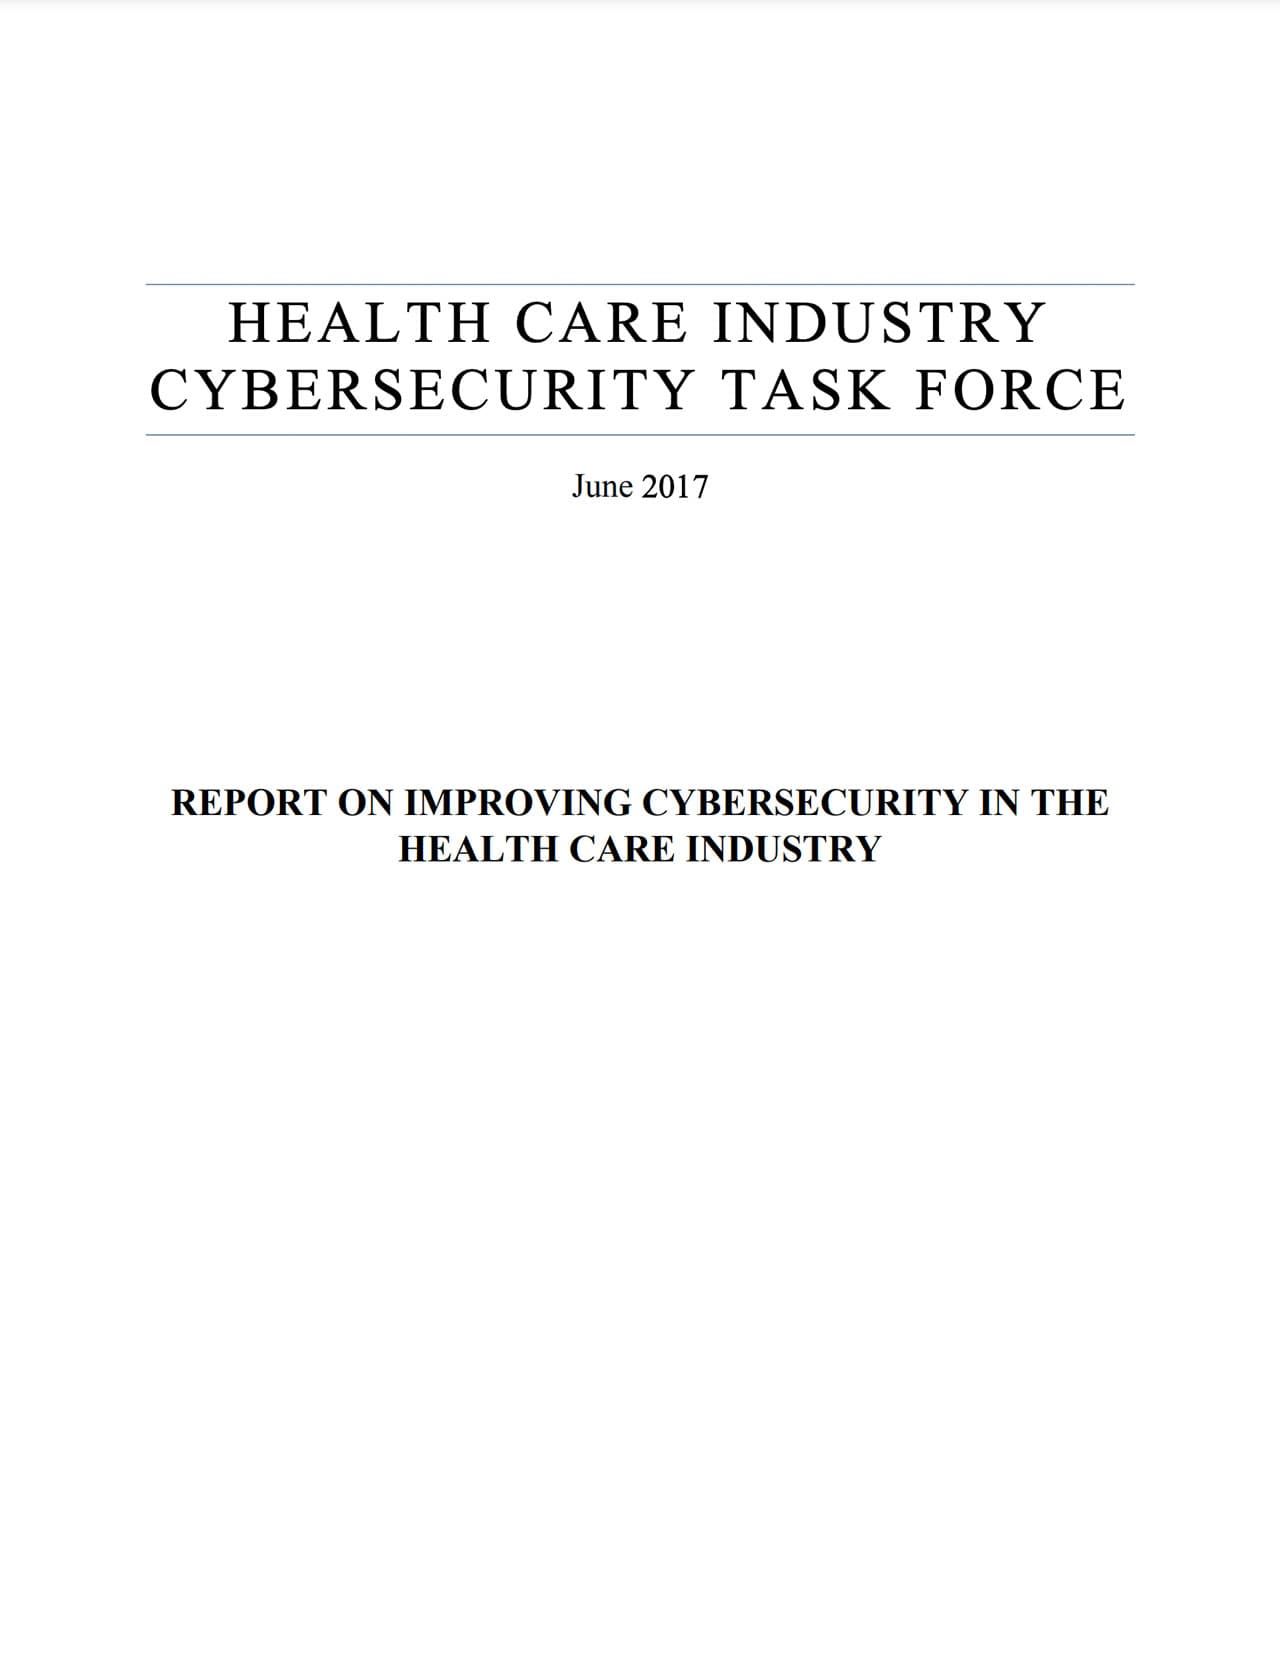 Health Care Industry Cybersecurity Task Force